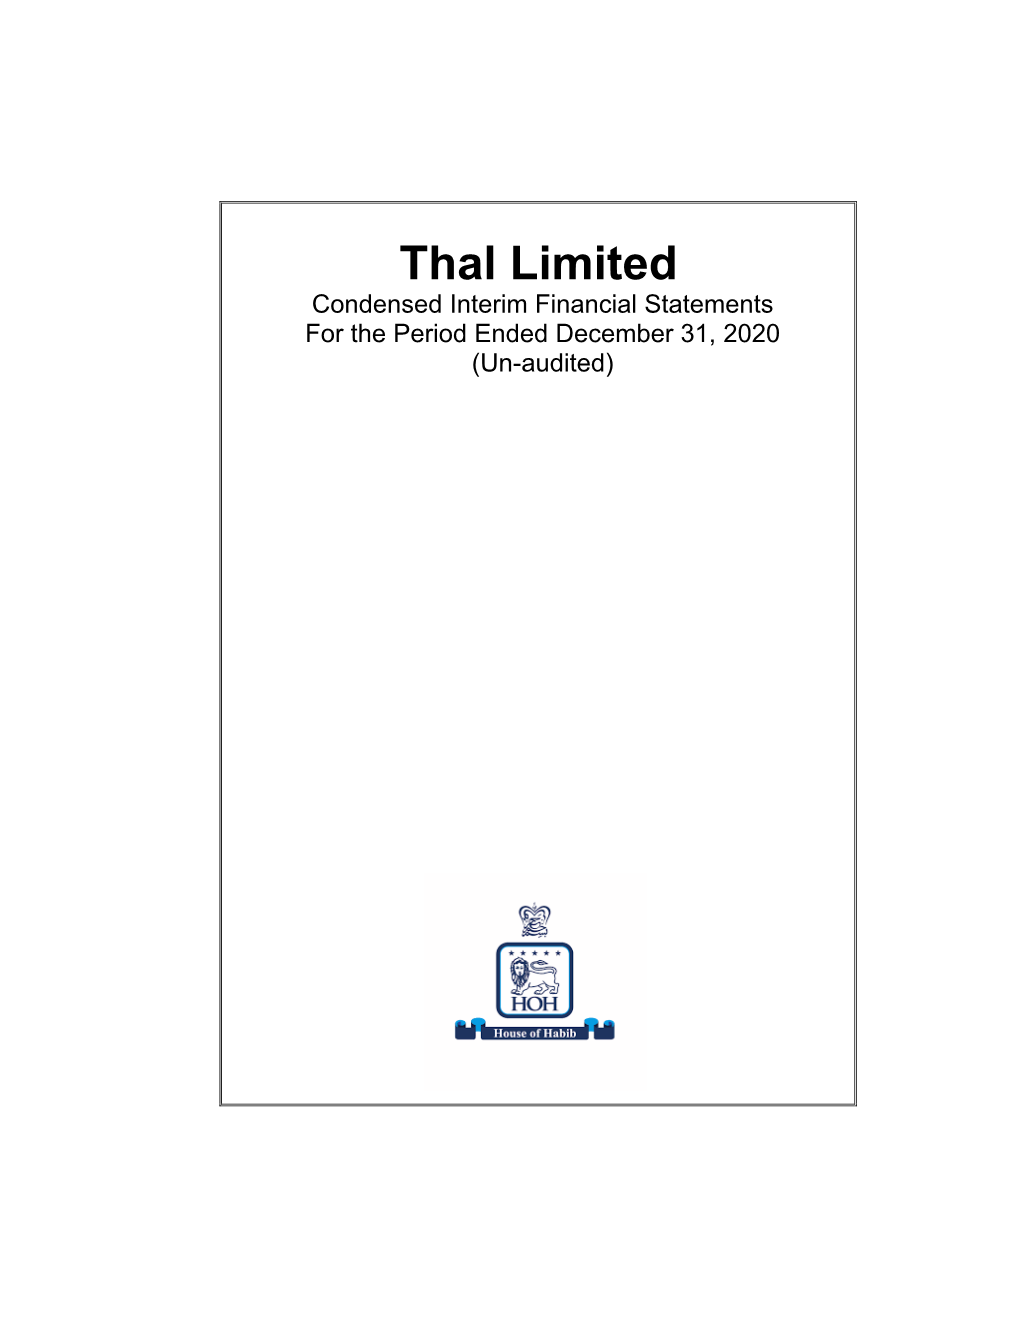 Thal Limited Condensed Interim Financial Statements for the Period Ended December 31, 2020 (Un-Audited) Thal Limited